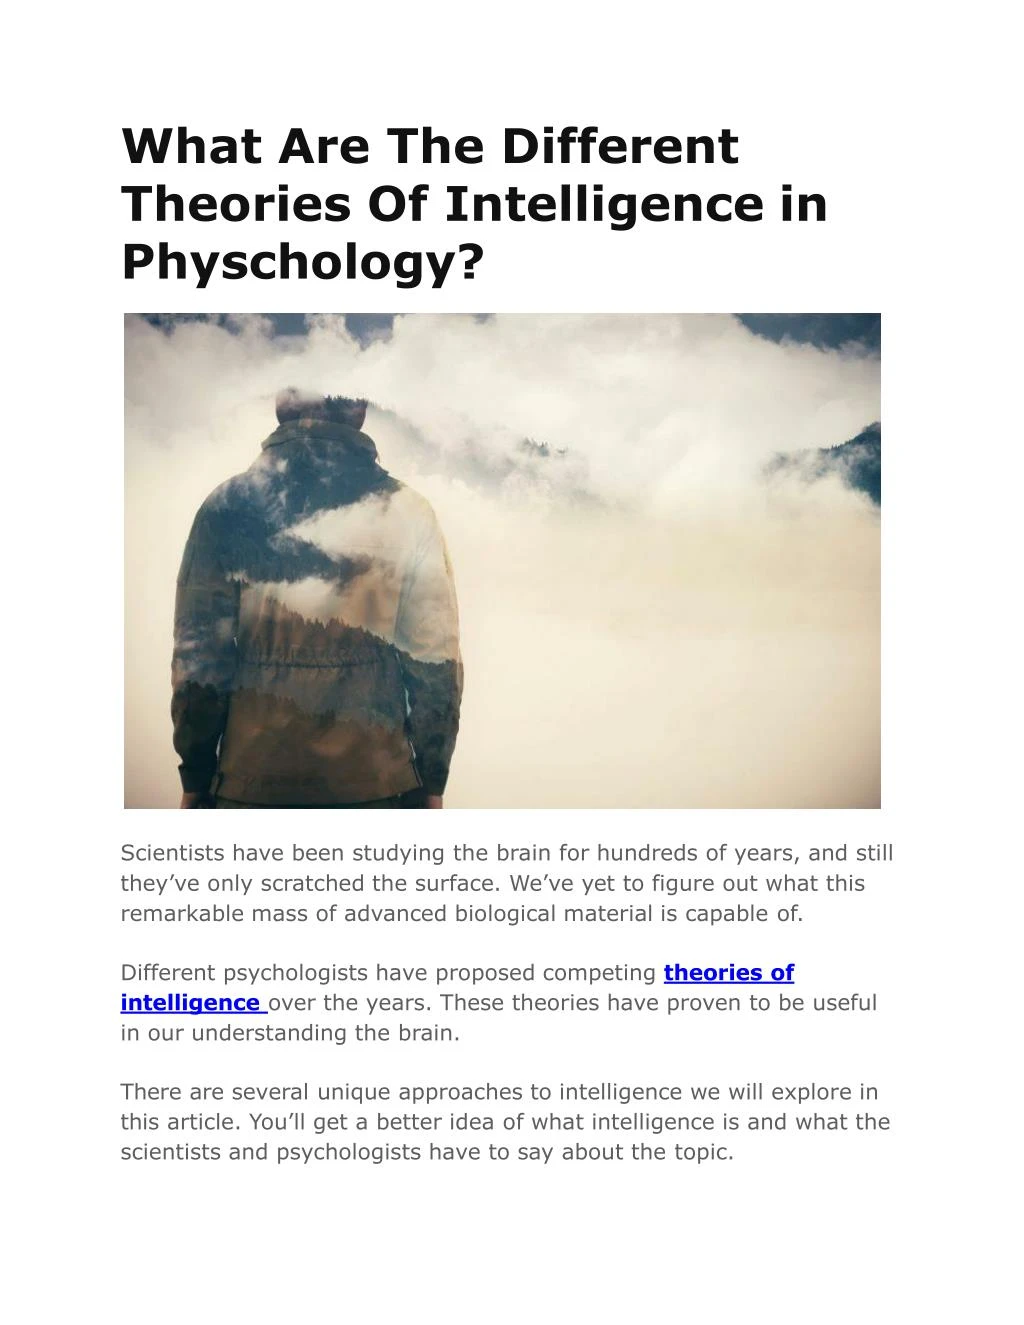 what are the different theories of intelligence in physchology